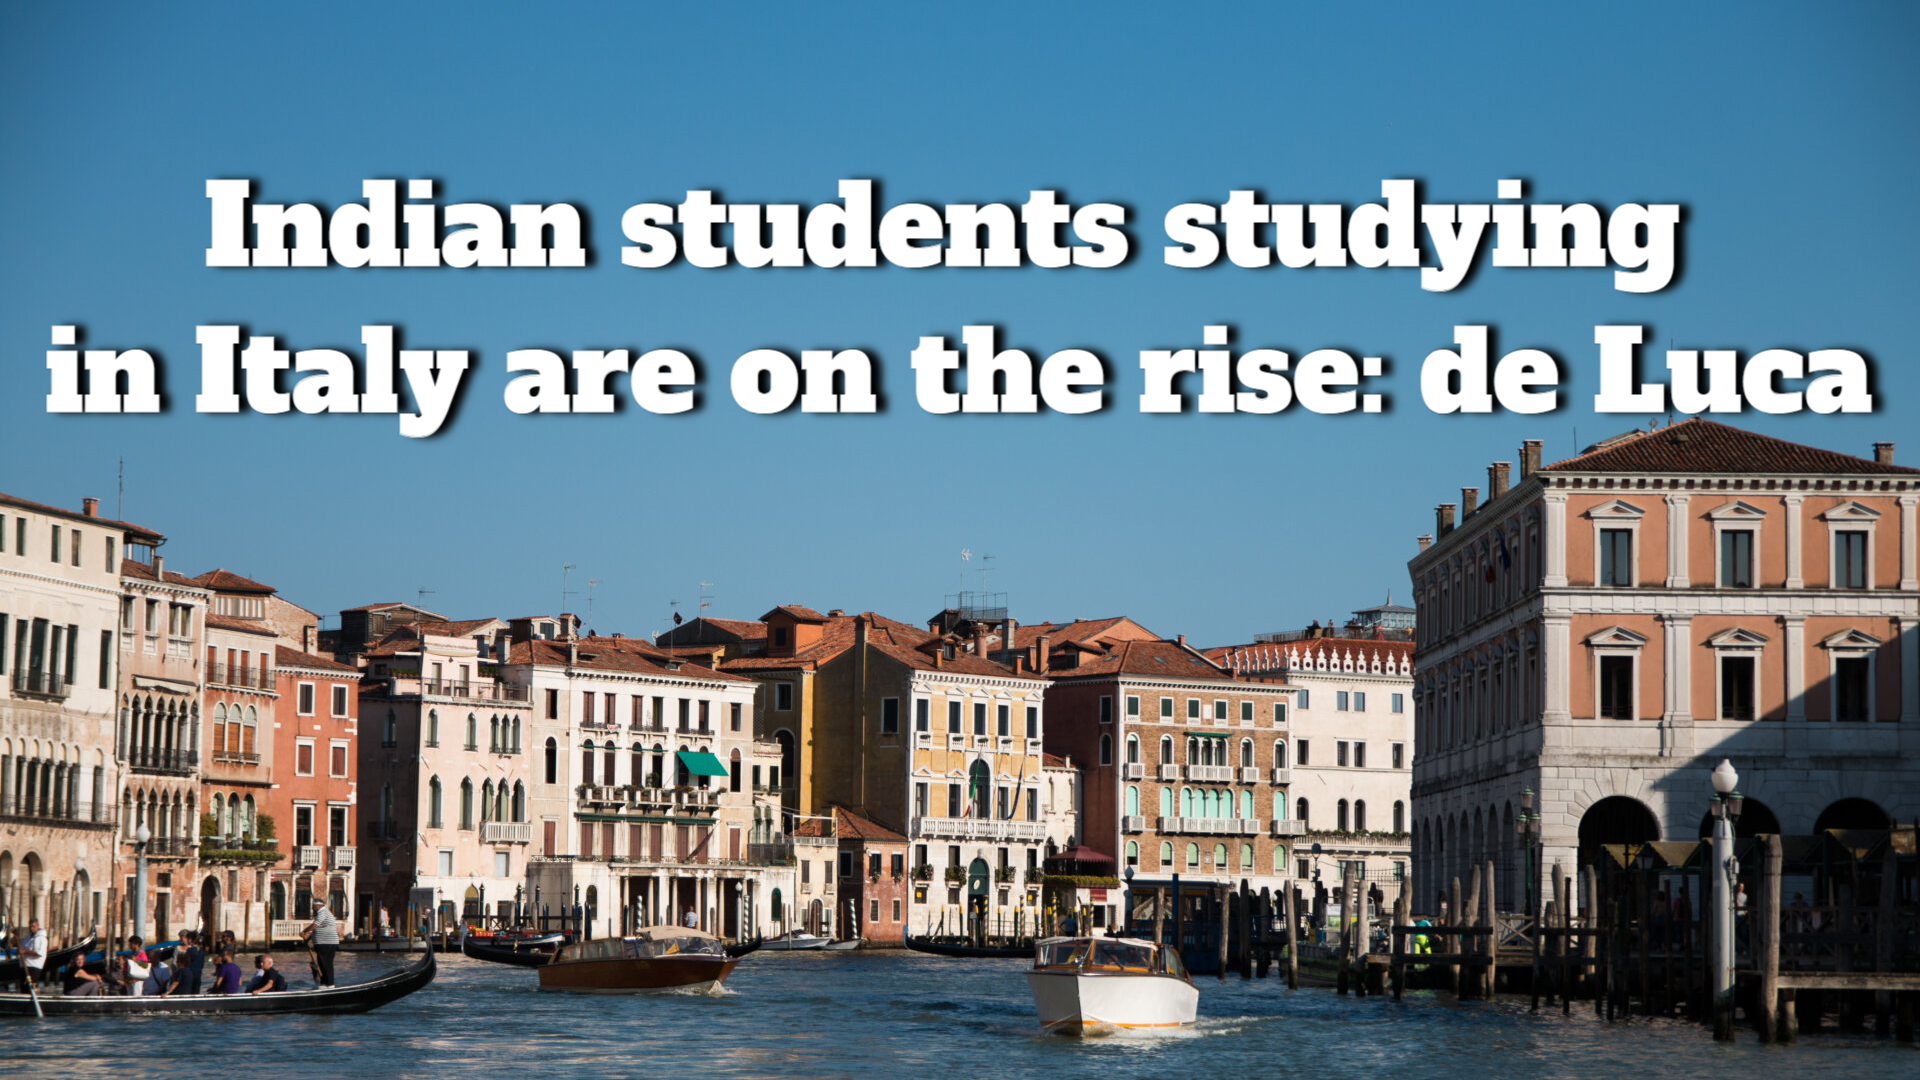 The number of Indian students studying in Italy is increasing: de Luca